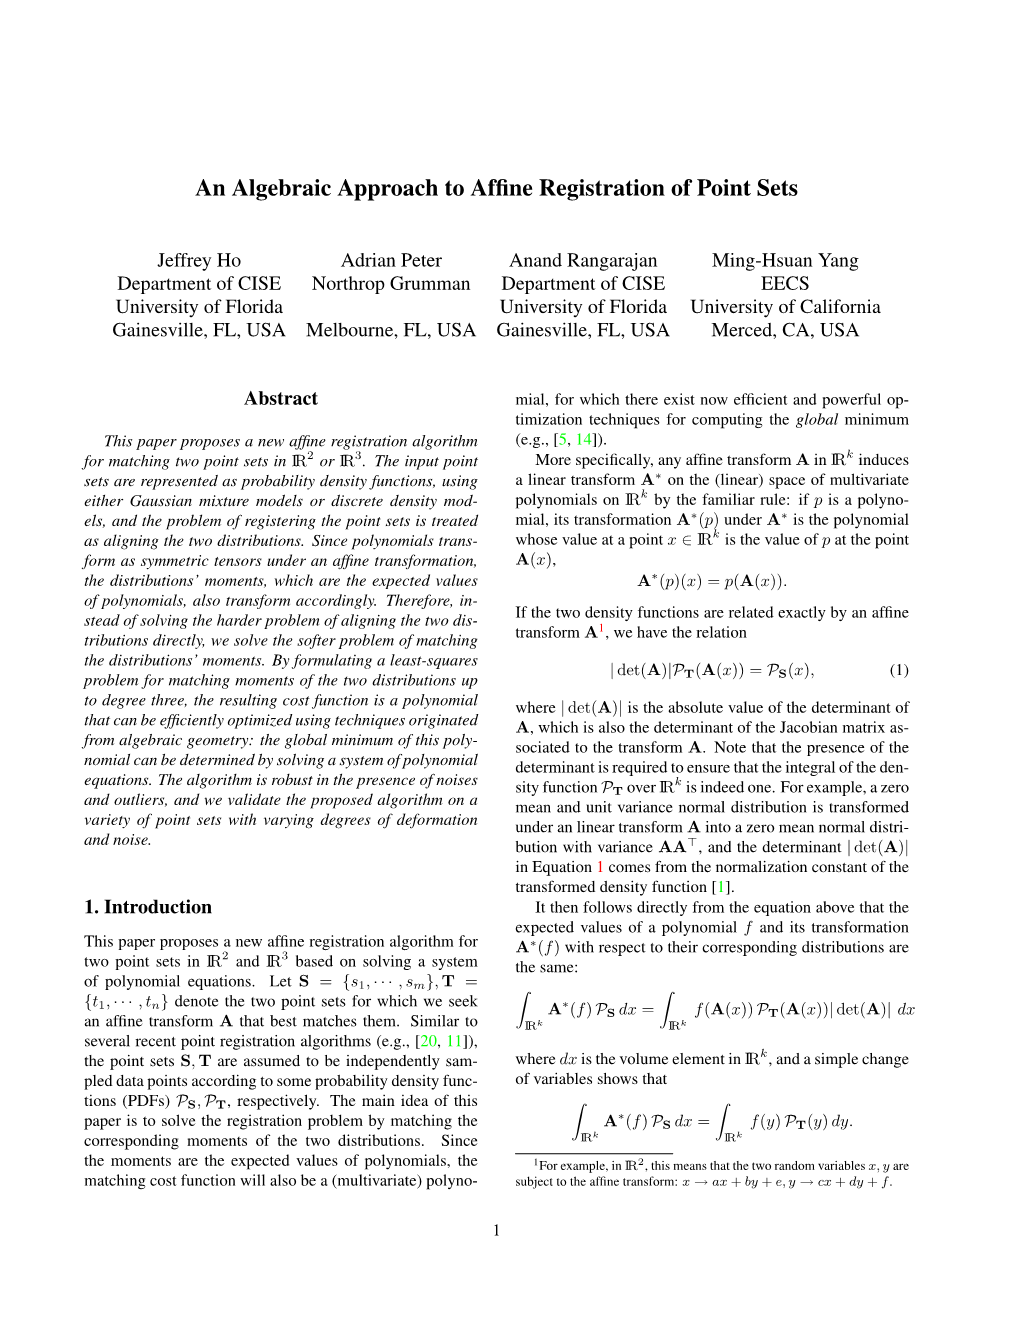 An Algebraic Approach to Affine Registration of Point Sets